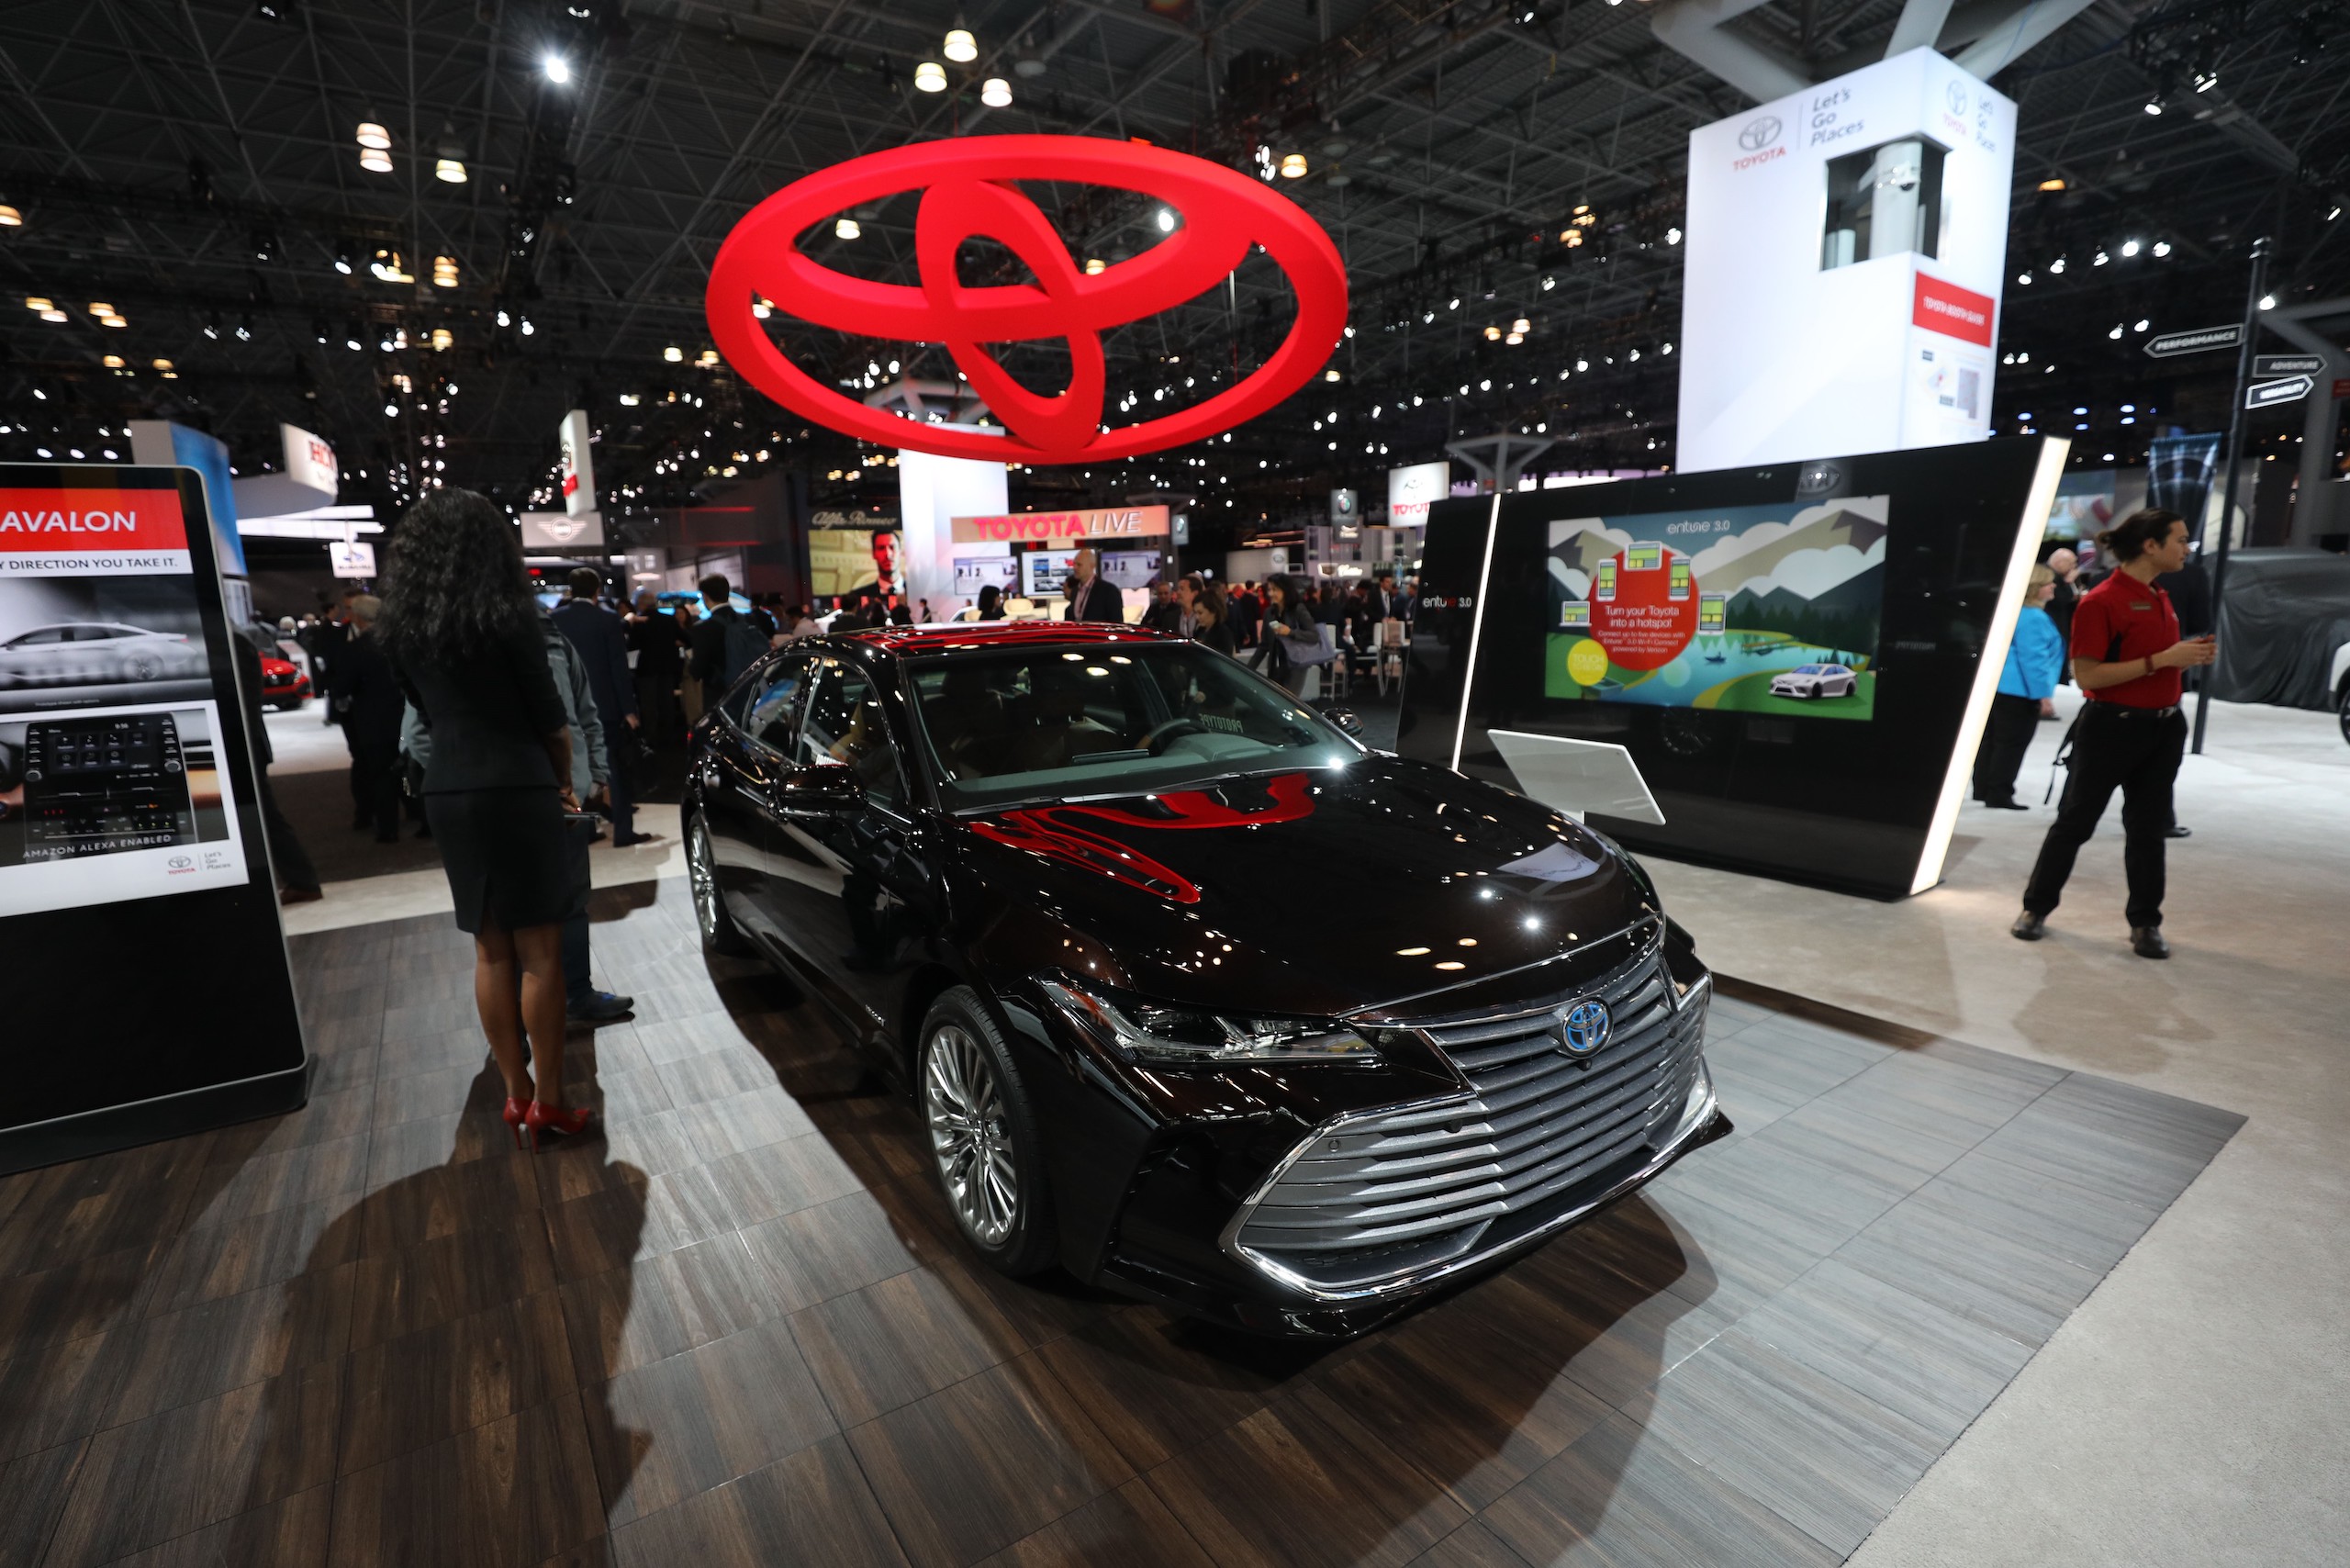 Toyota Avalon is on display during the New York Autoshow